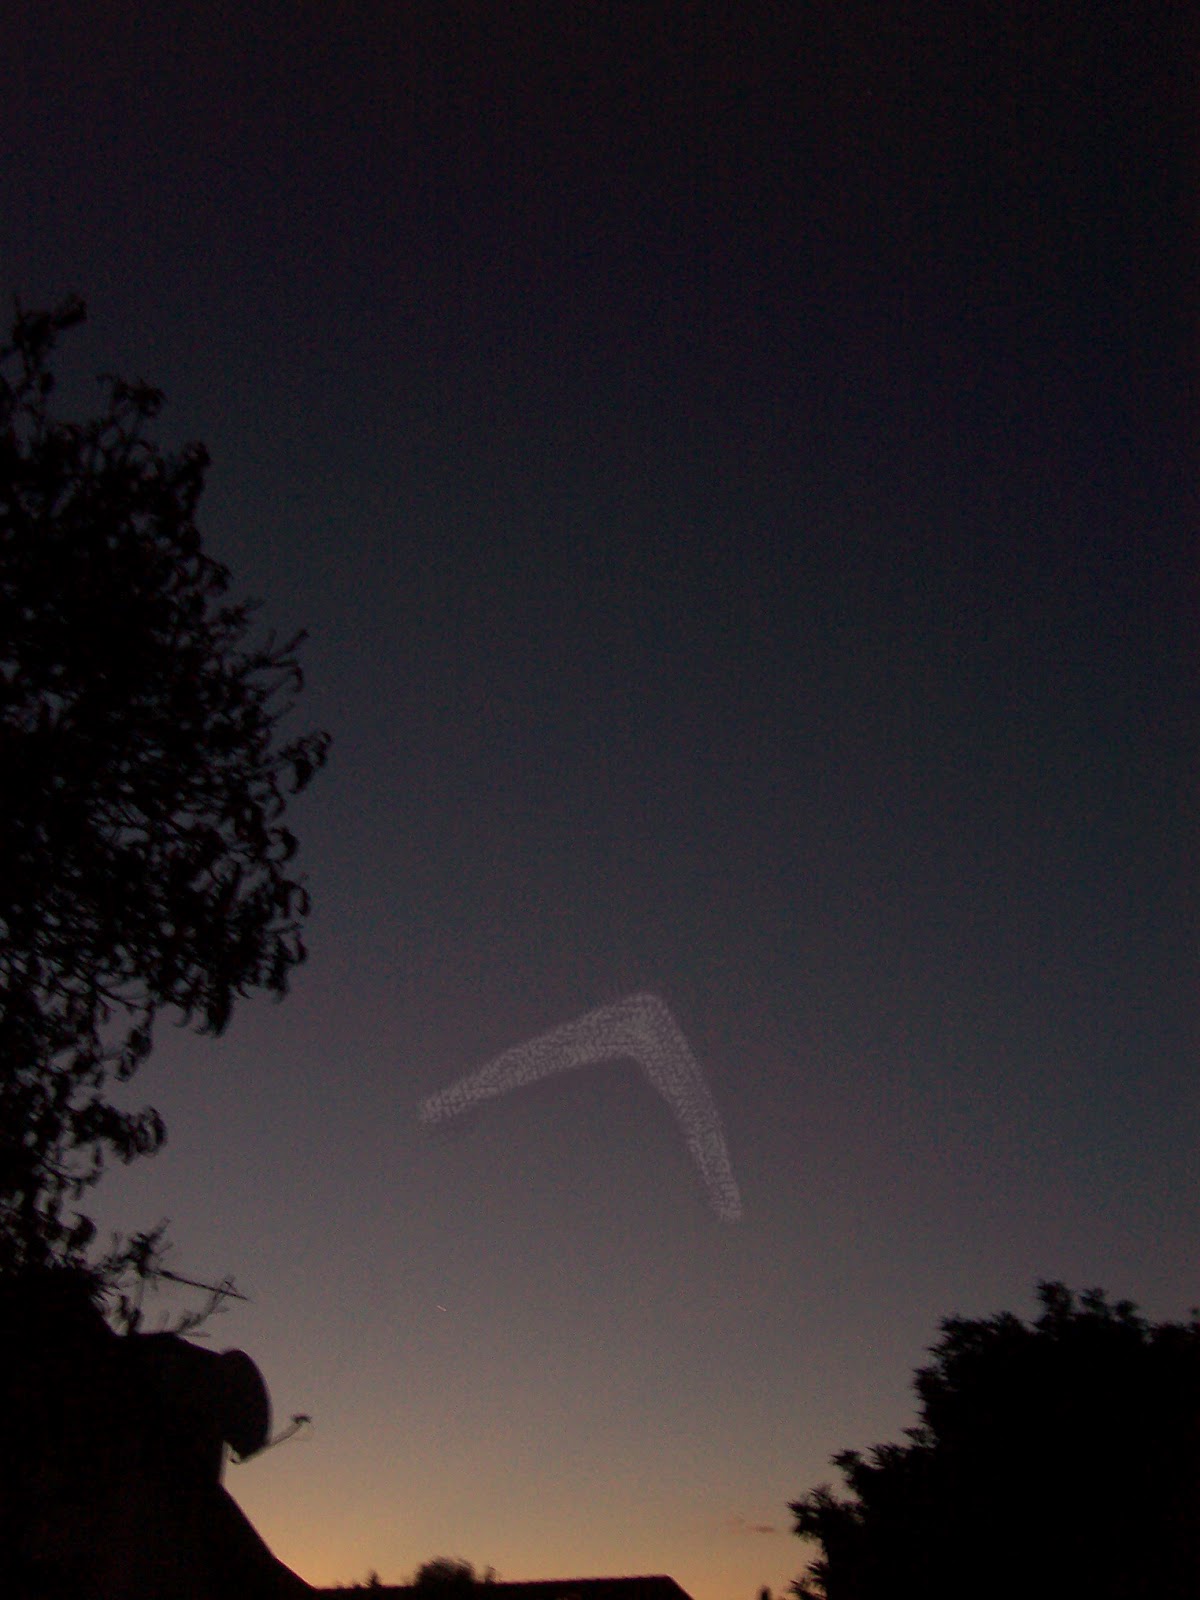 Silent, dark chevron-shaped object flew over us and faded from view